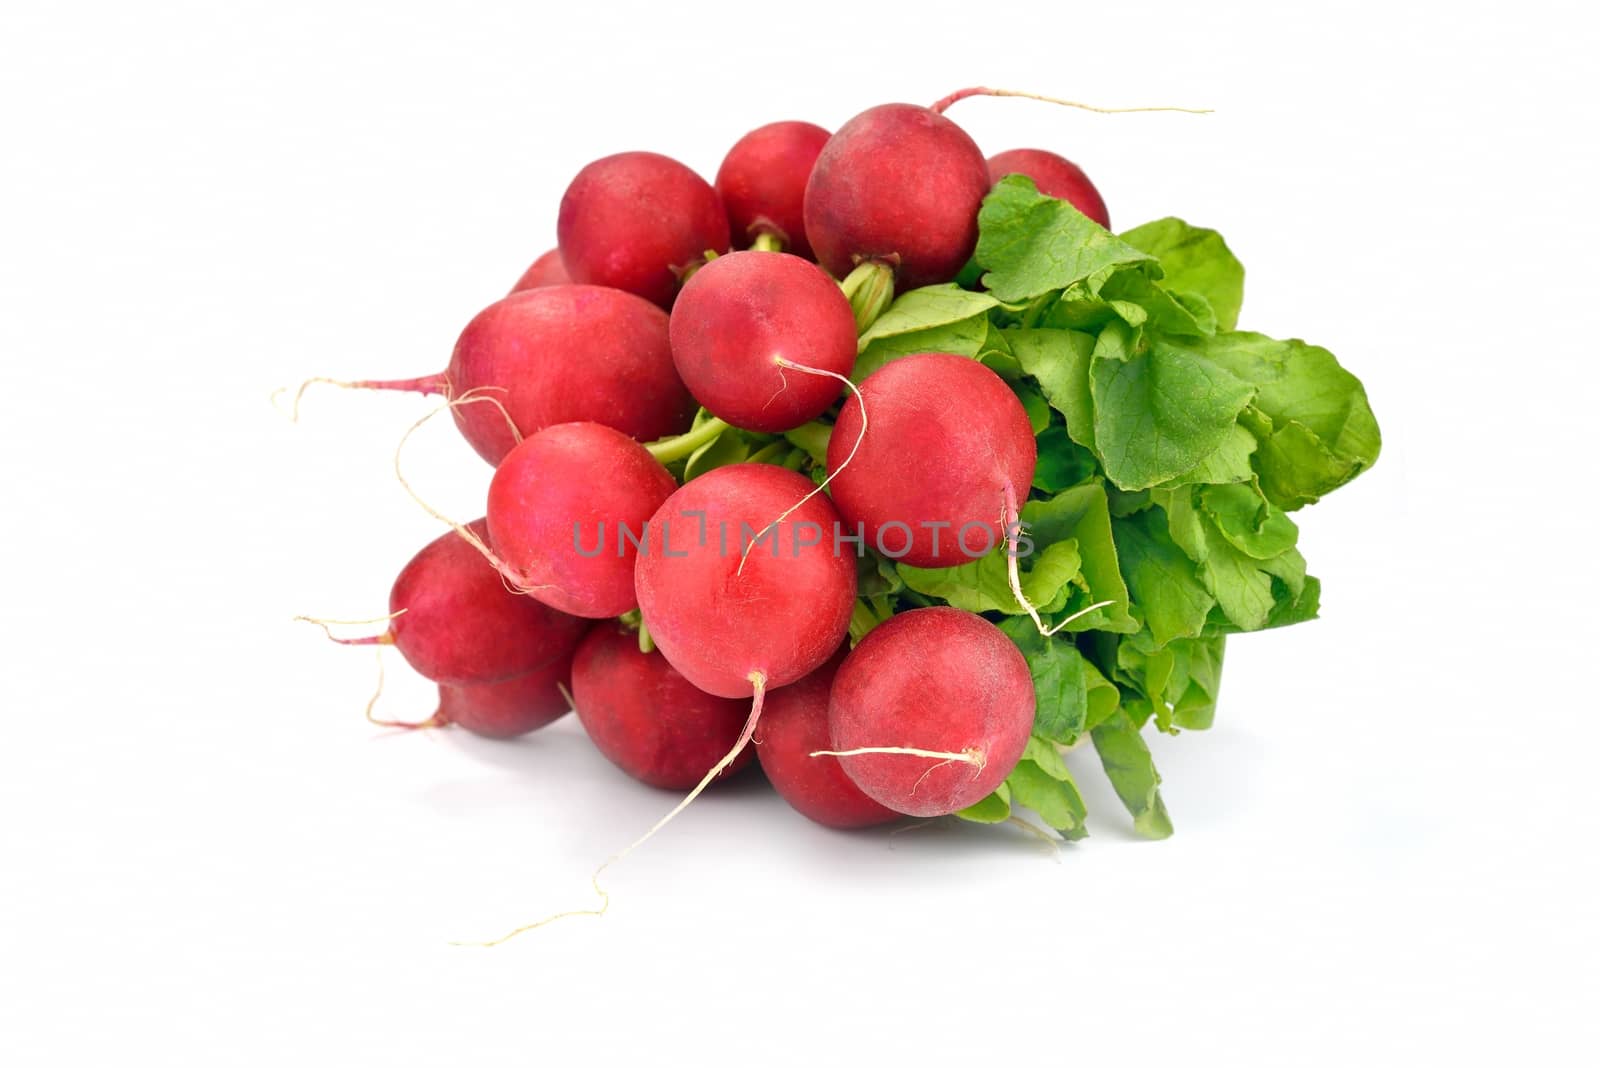 Close-up of a bunch of radishes over white background